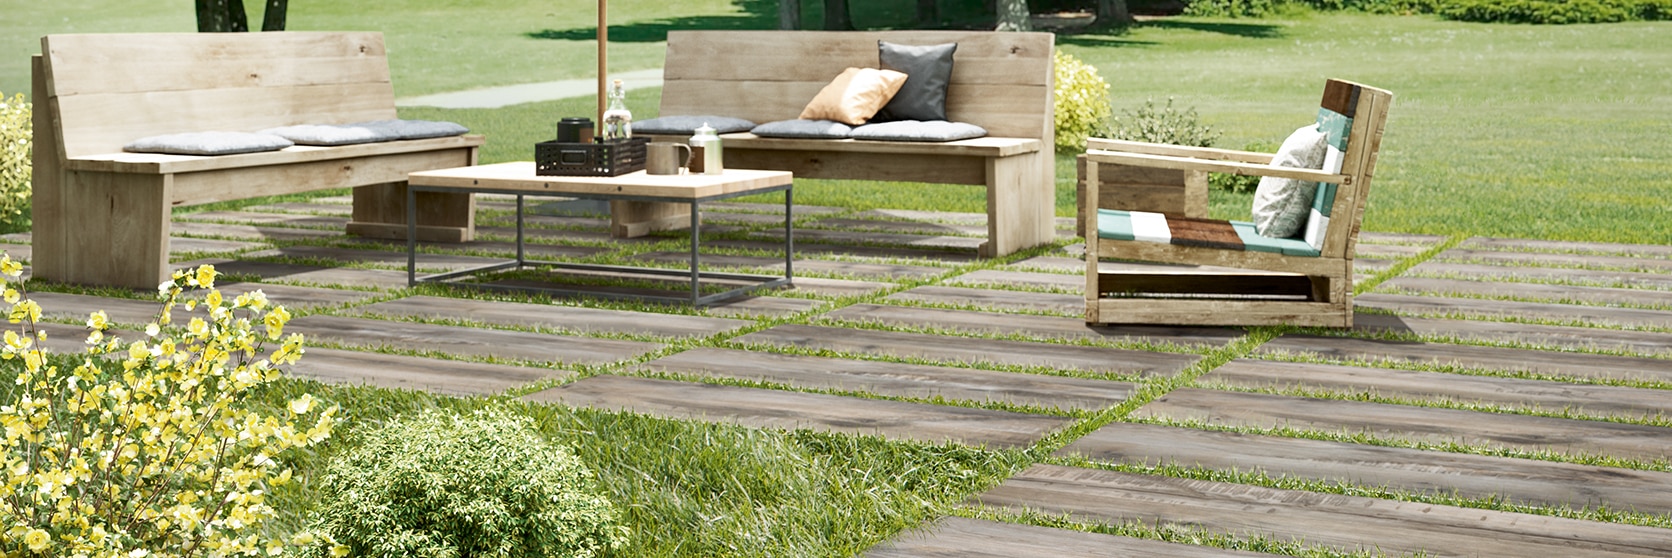 Lawn furniture on 16" x 48" 2 centimeter porcelain pavers that look like seasoned wood, set on top of green grass.